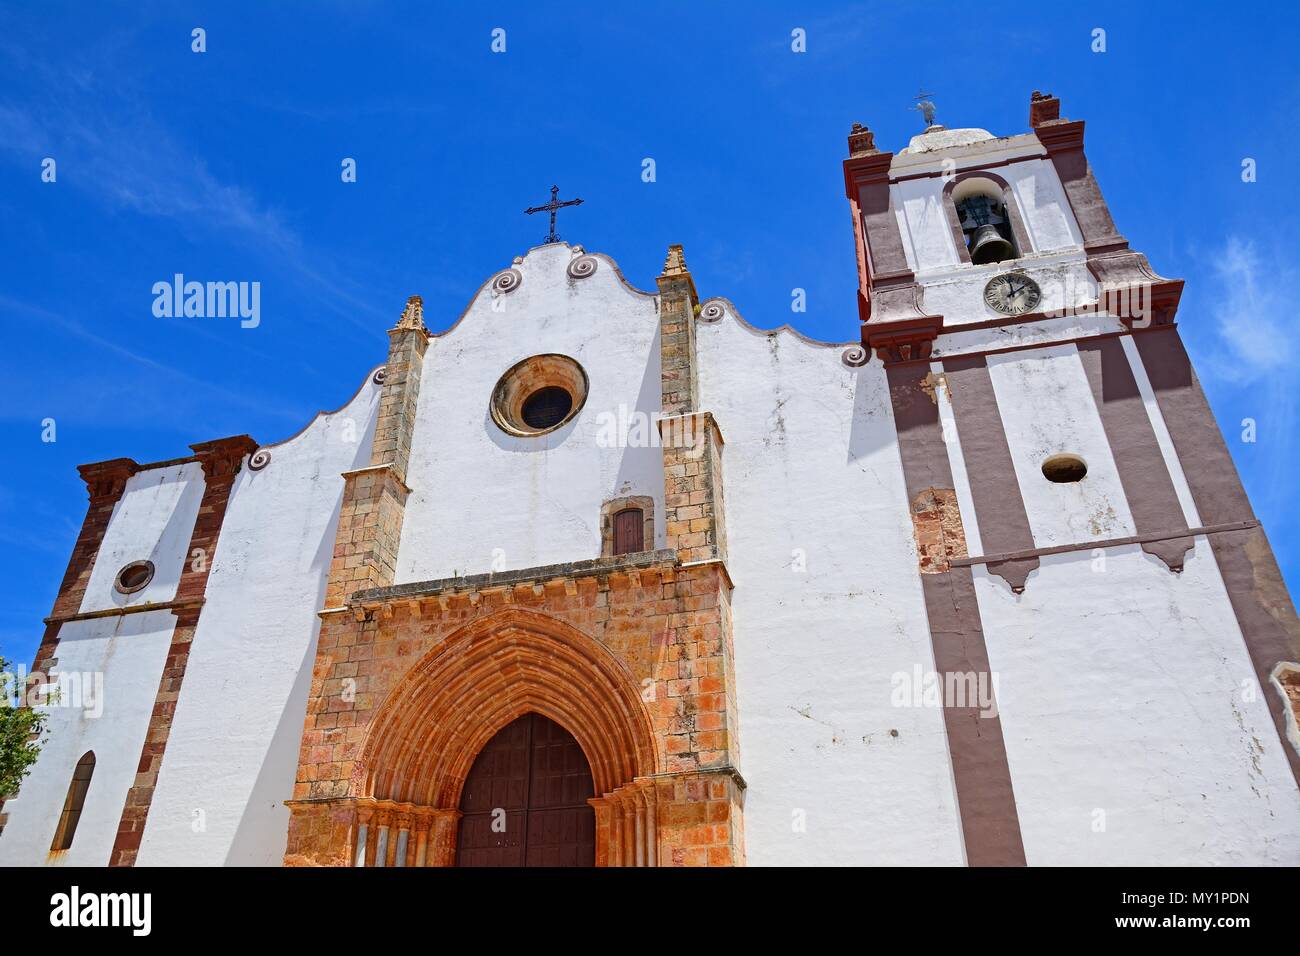 View of the Gothic cathedral (Igreja da Misericordia) in the town centre, Silves, Portugal, Europe. Stock Photo